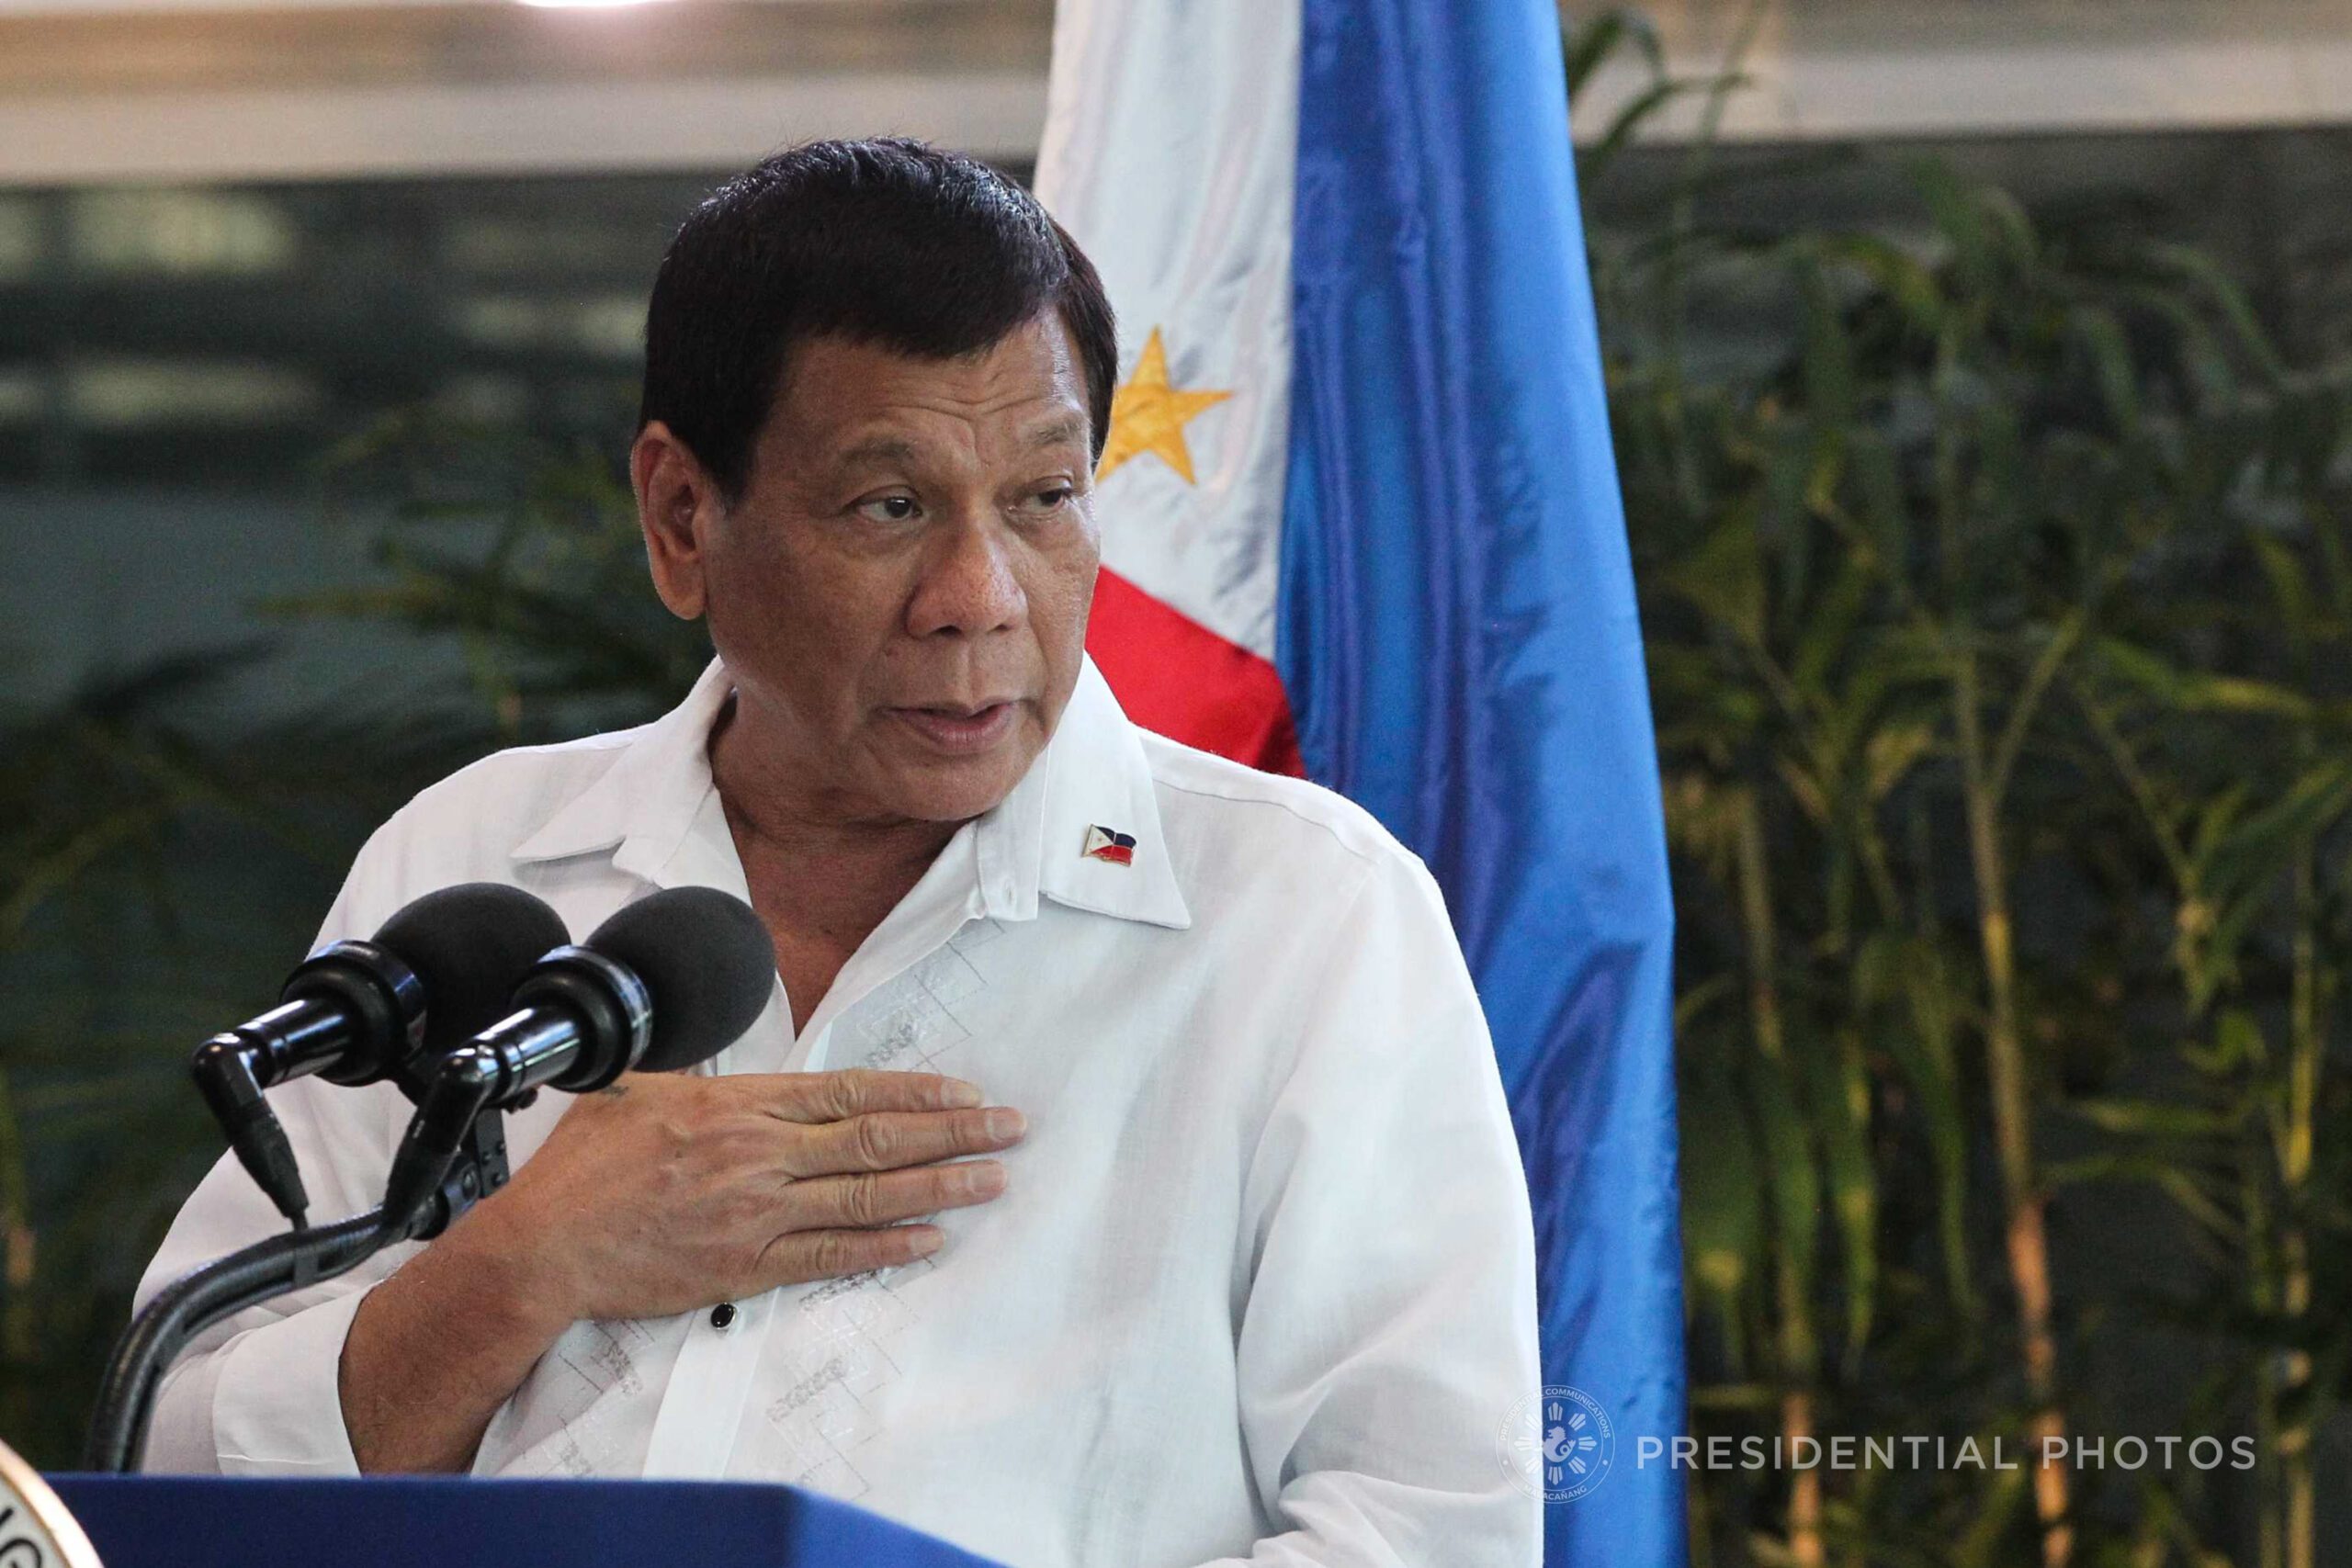 Duterte ‘offended’ by Santiago’s criticism of drug rehab approach